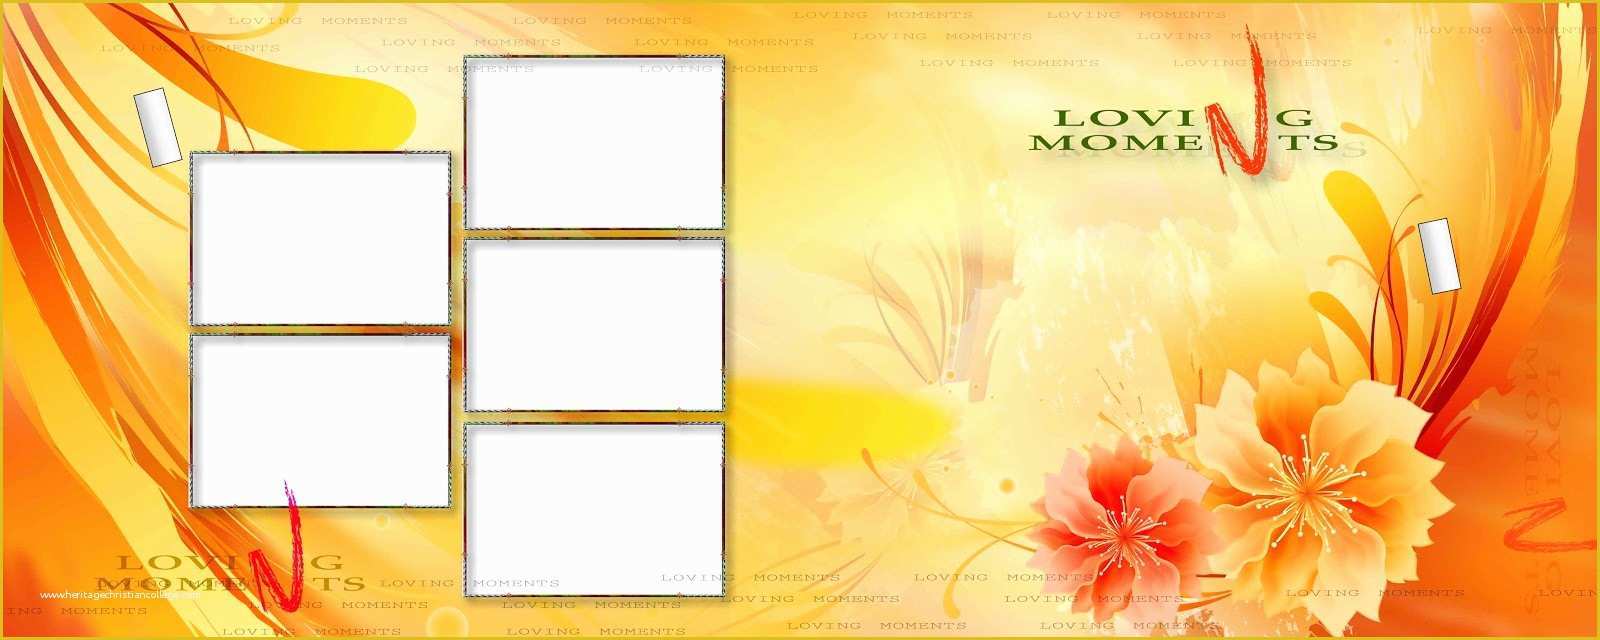 Psd Templates Free Download Of Psd Wedding Backgrounds for Photoshop Free Psd